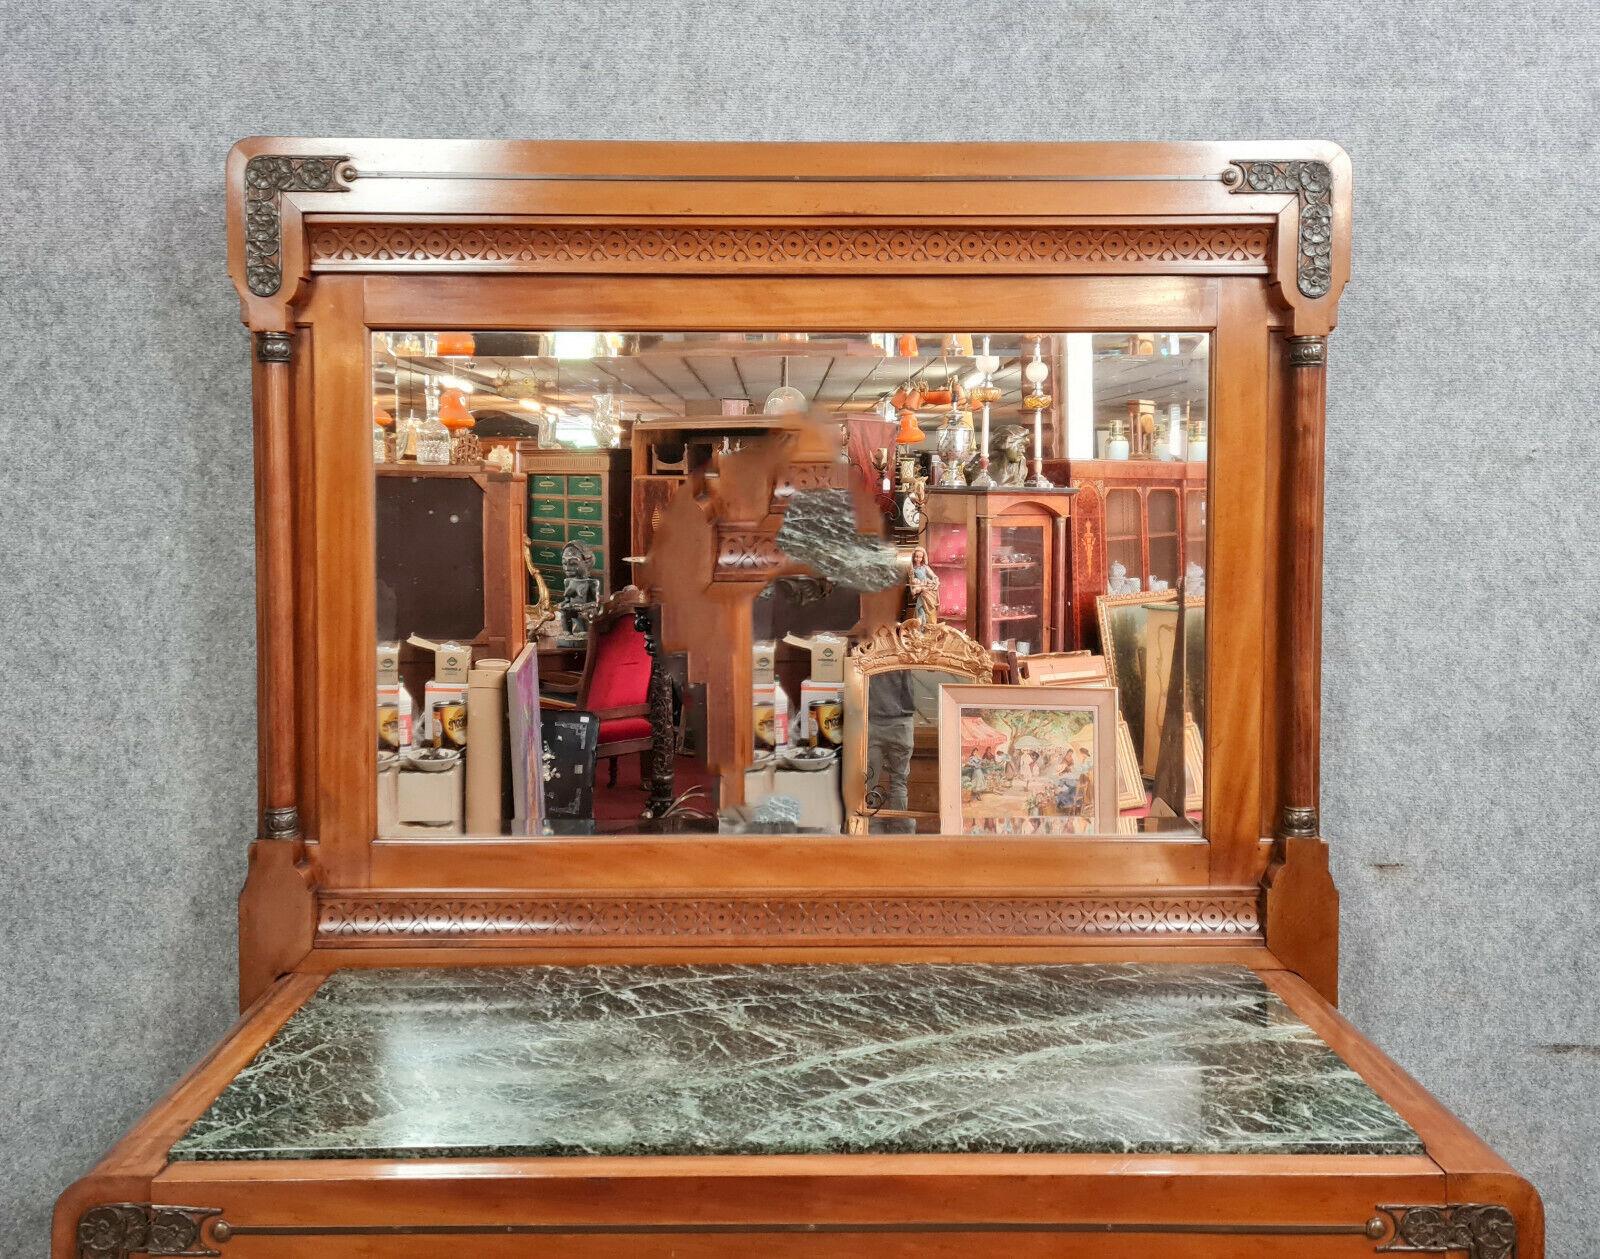 Step into the past with this museum-quality Empire dressing chest featuring a psyche mirror, crafted from blonde mahogany and originating from the late 19th to early 20th century. The chest opens at the front to reveal three drawers adorned with